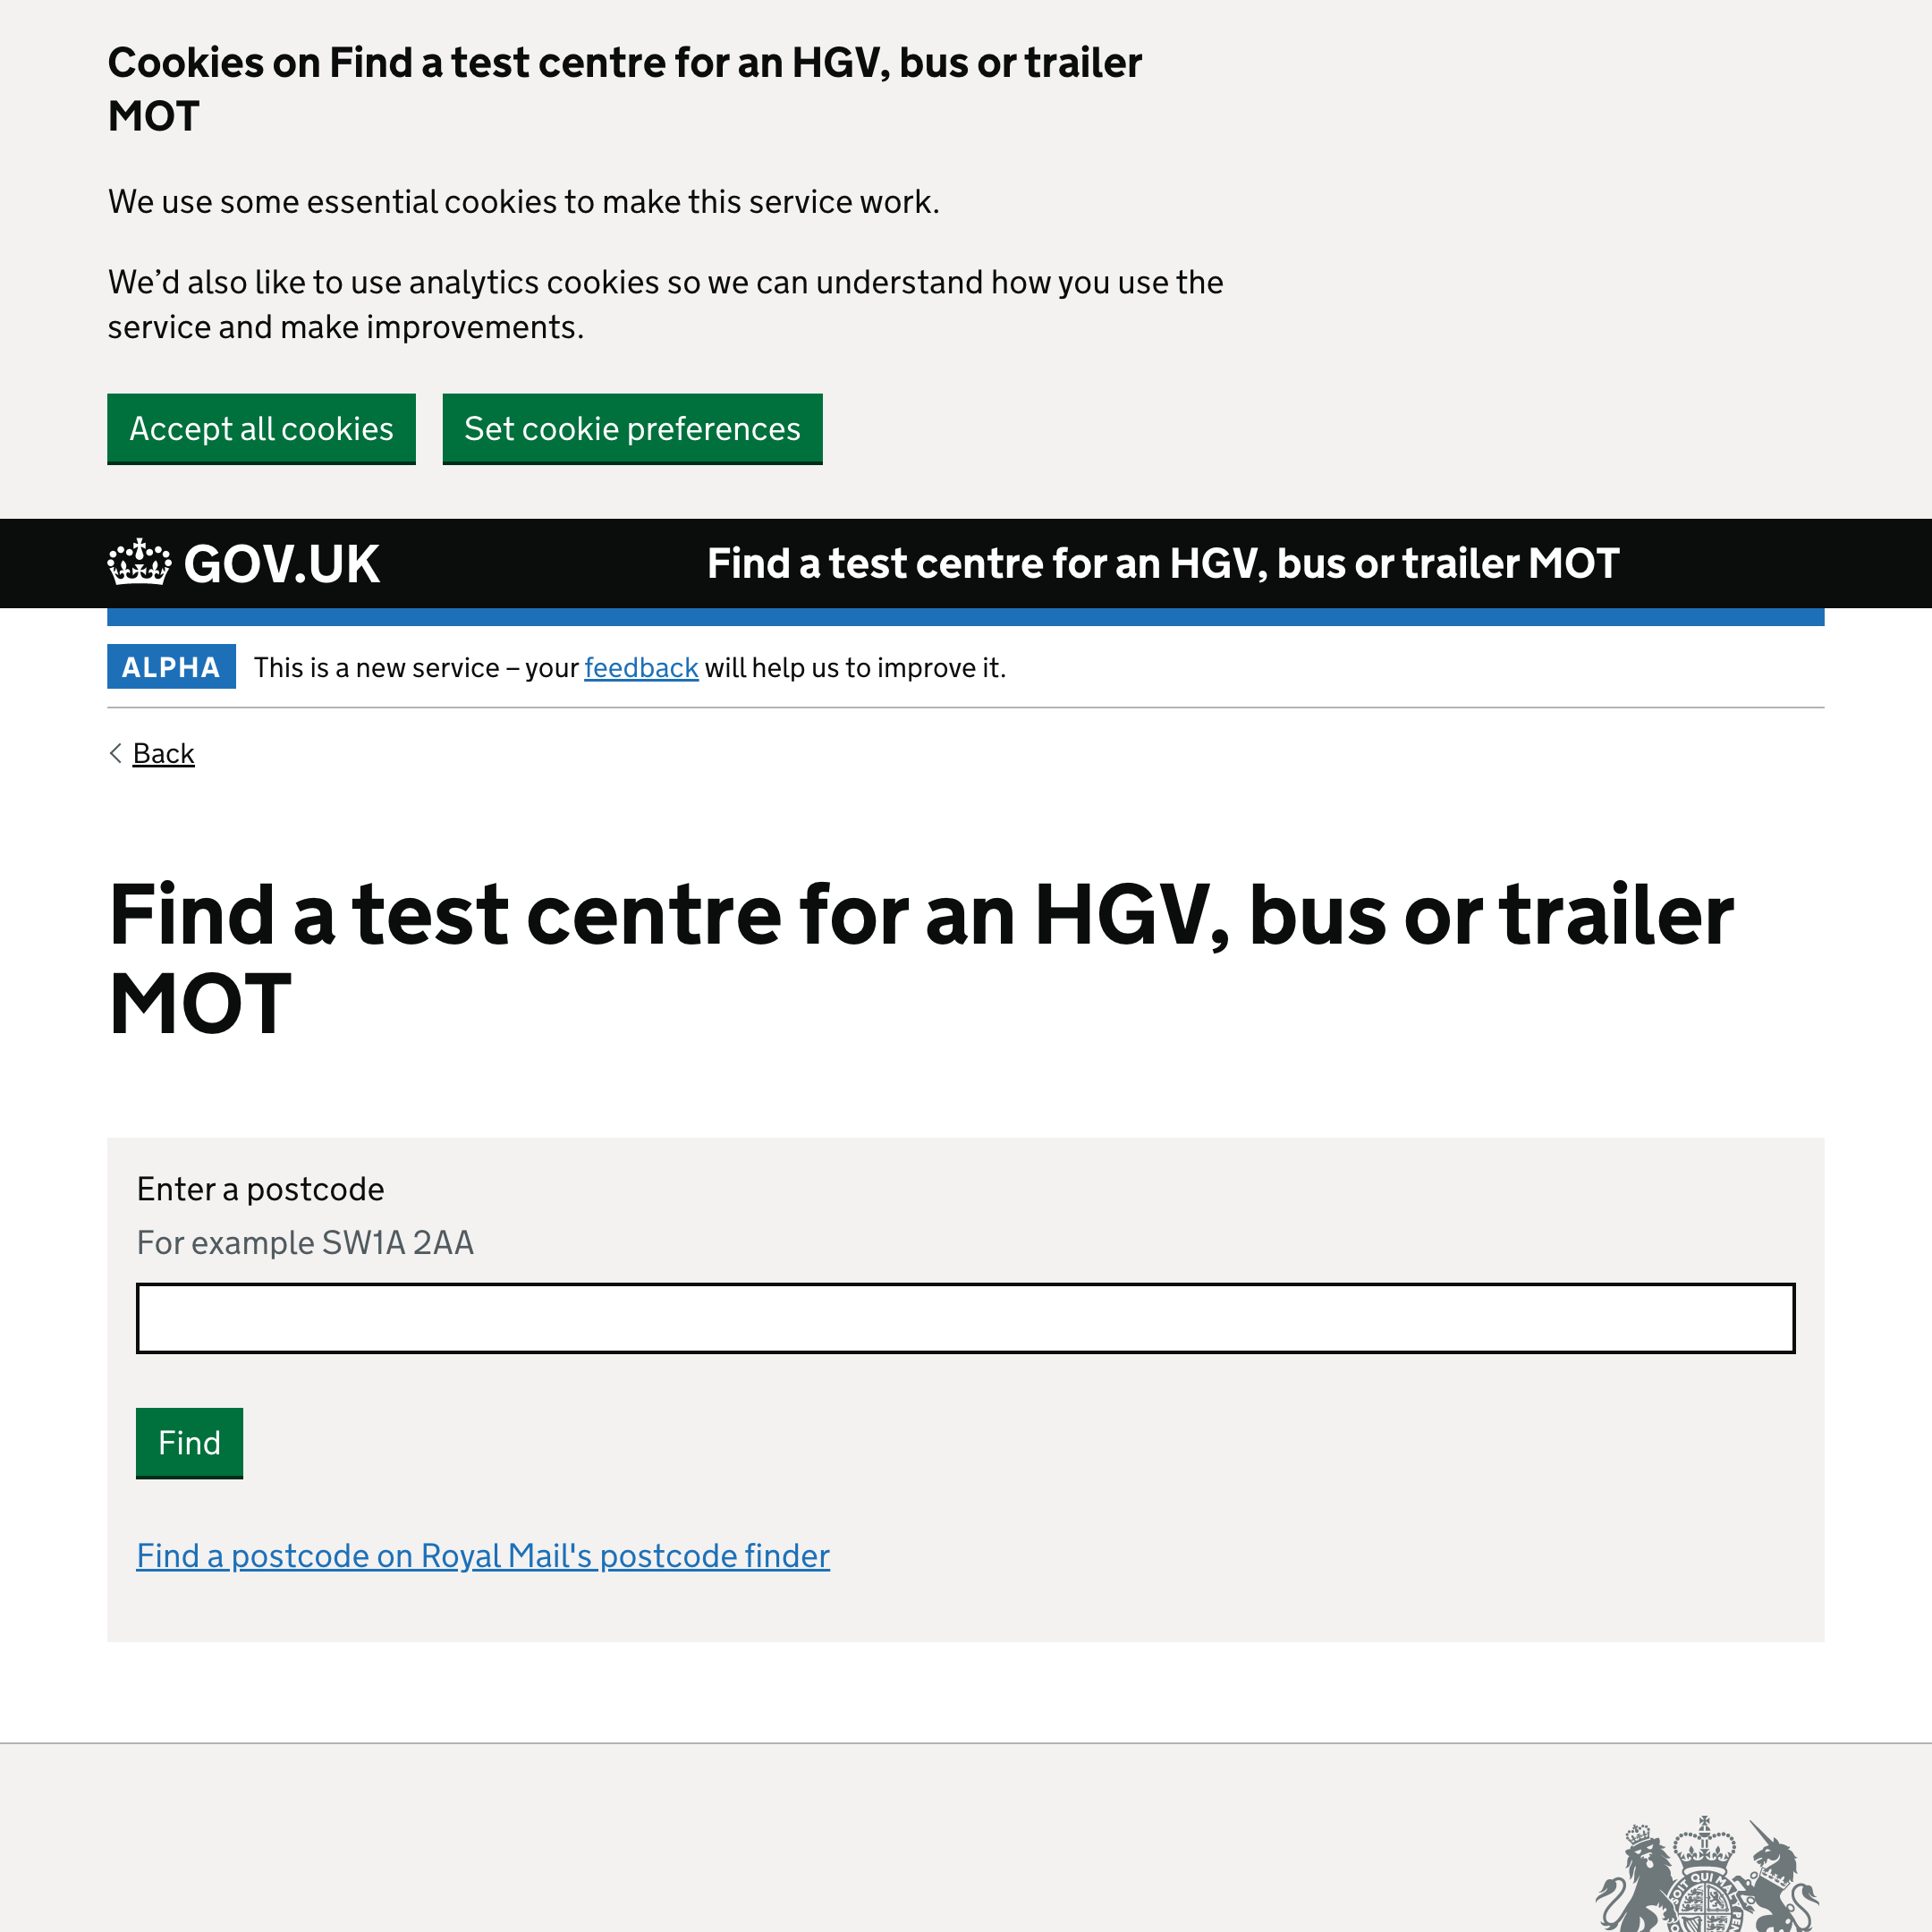 Find a test centre for an HGV, bus or trailer MOT